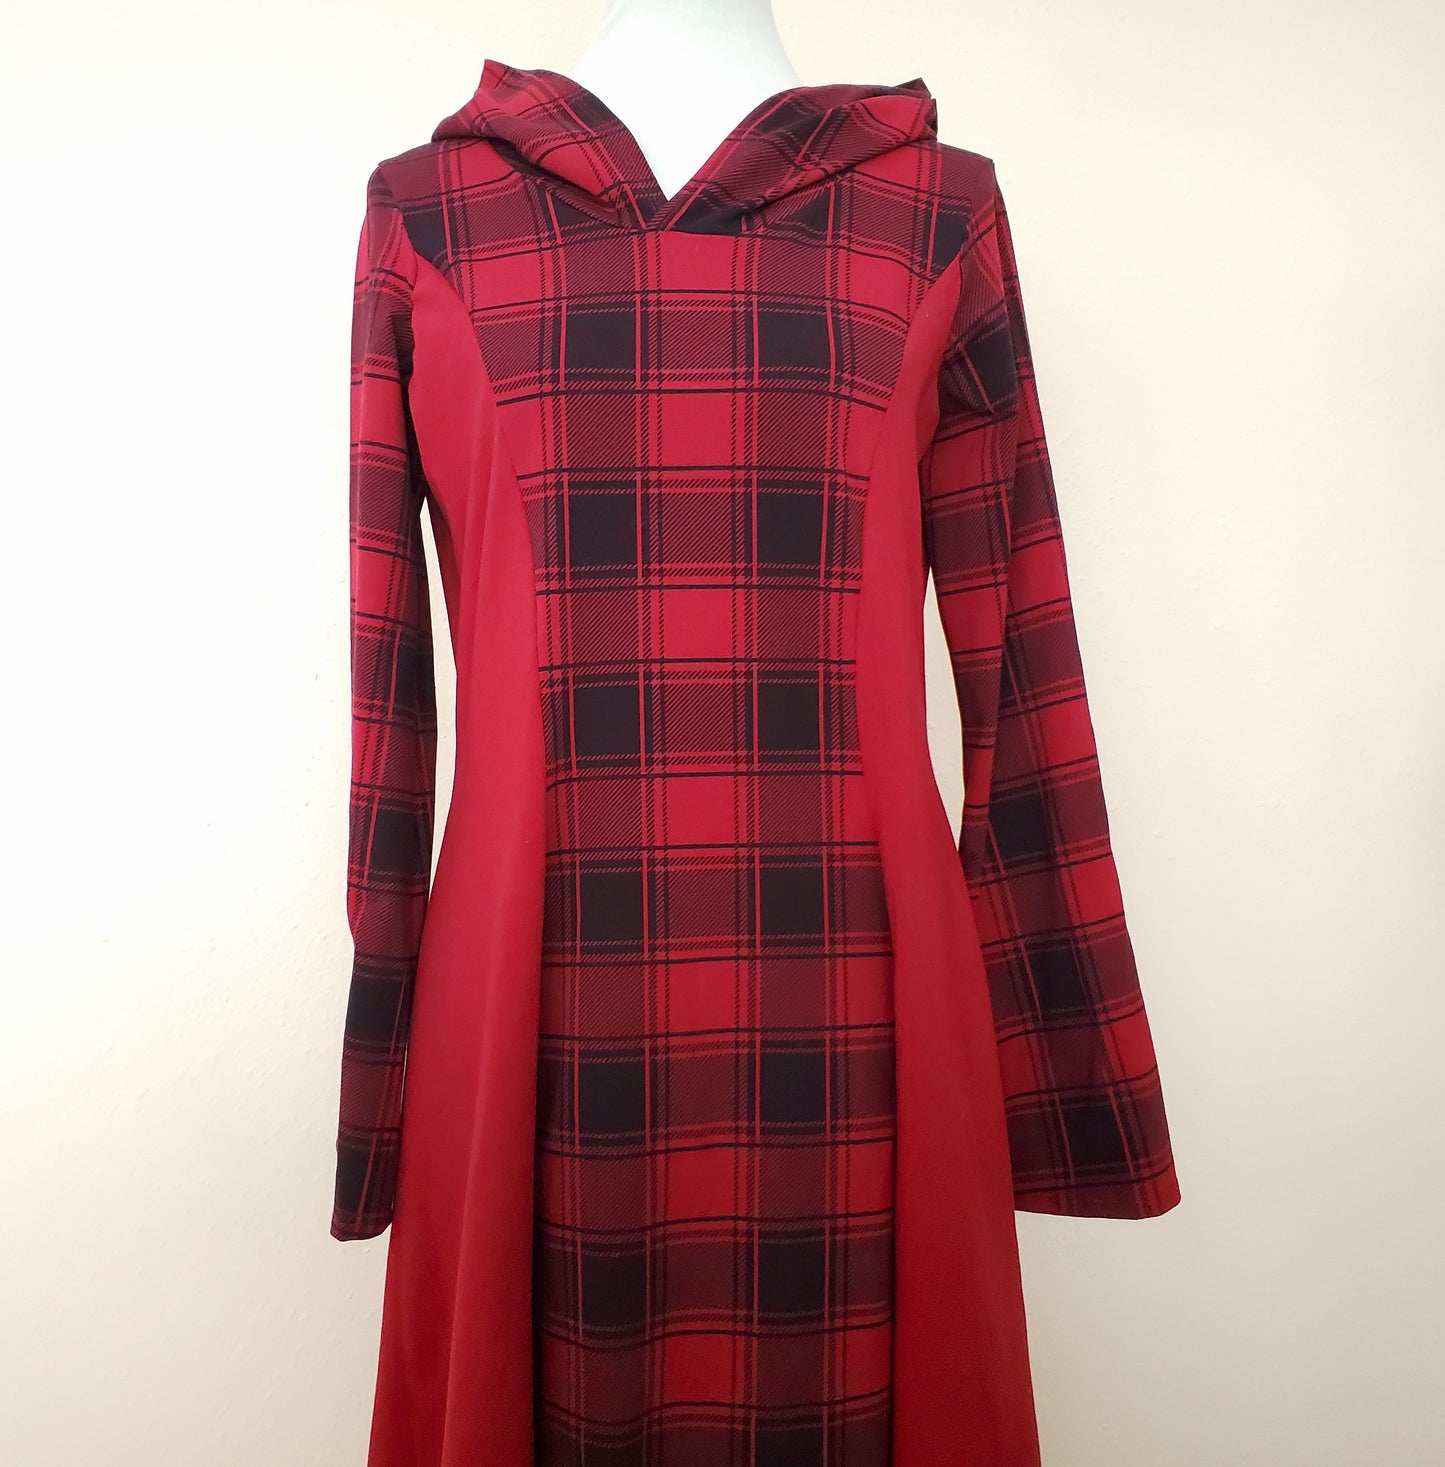 Plaid Hoodie Dress for Kids in a Variety of Colors